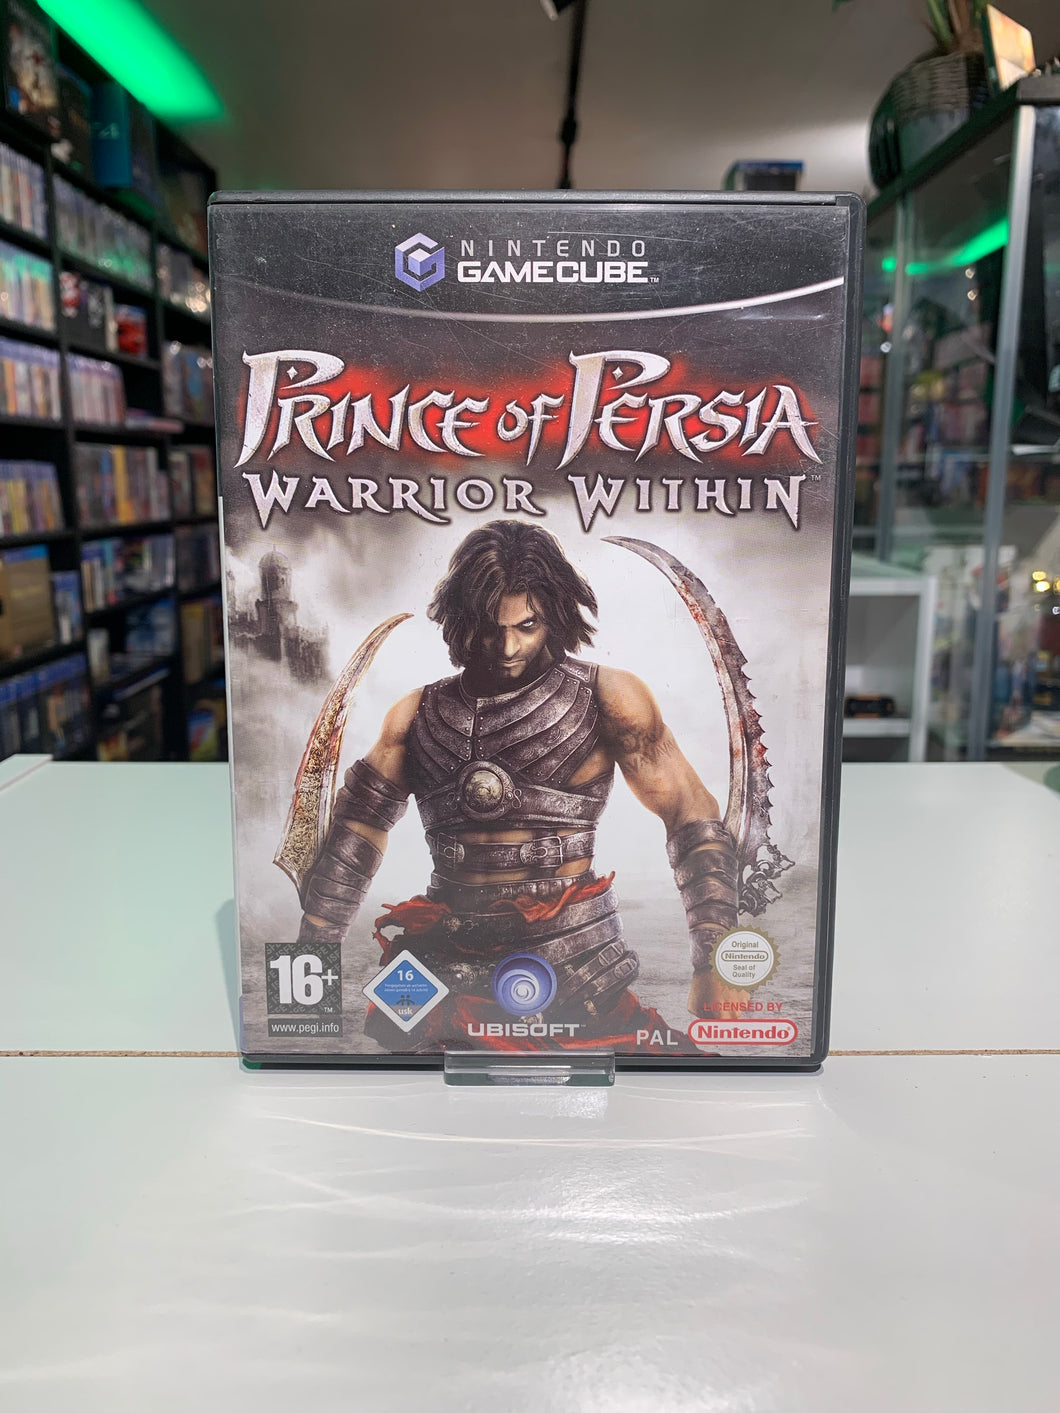 Prince of persia Warrior within / Gamecube